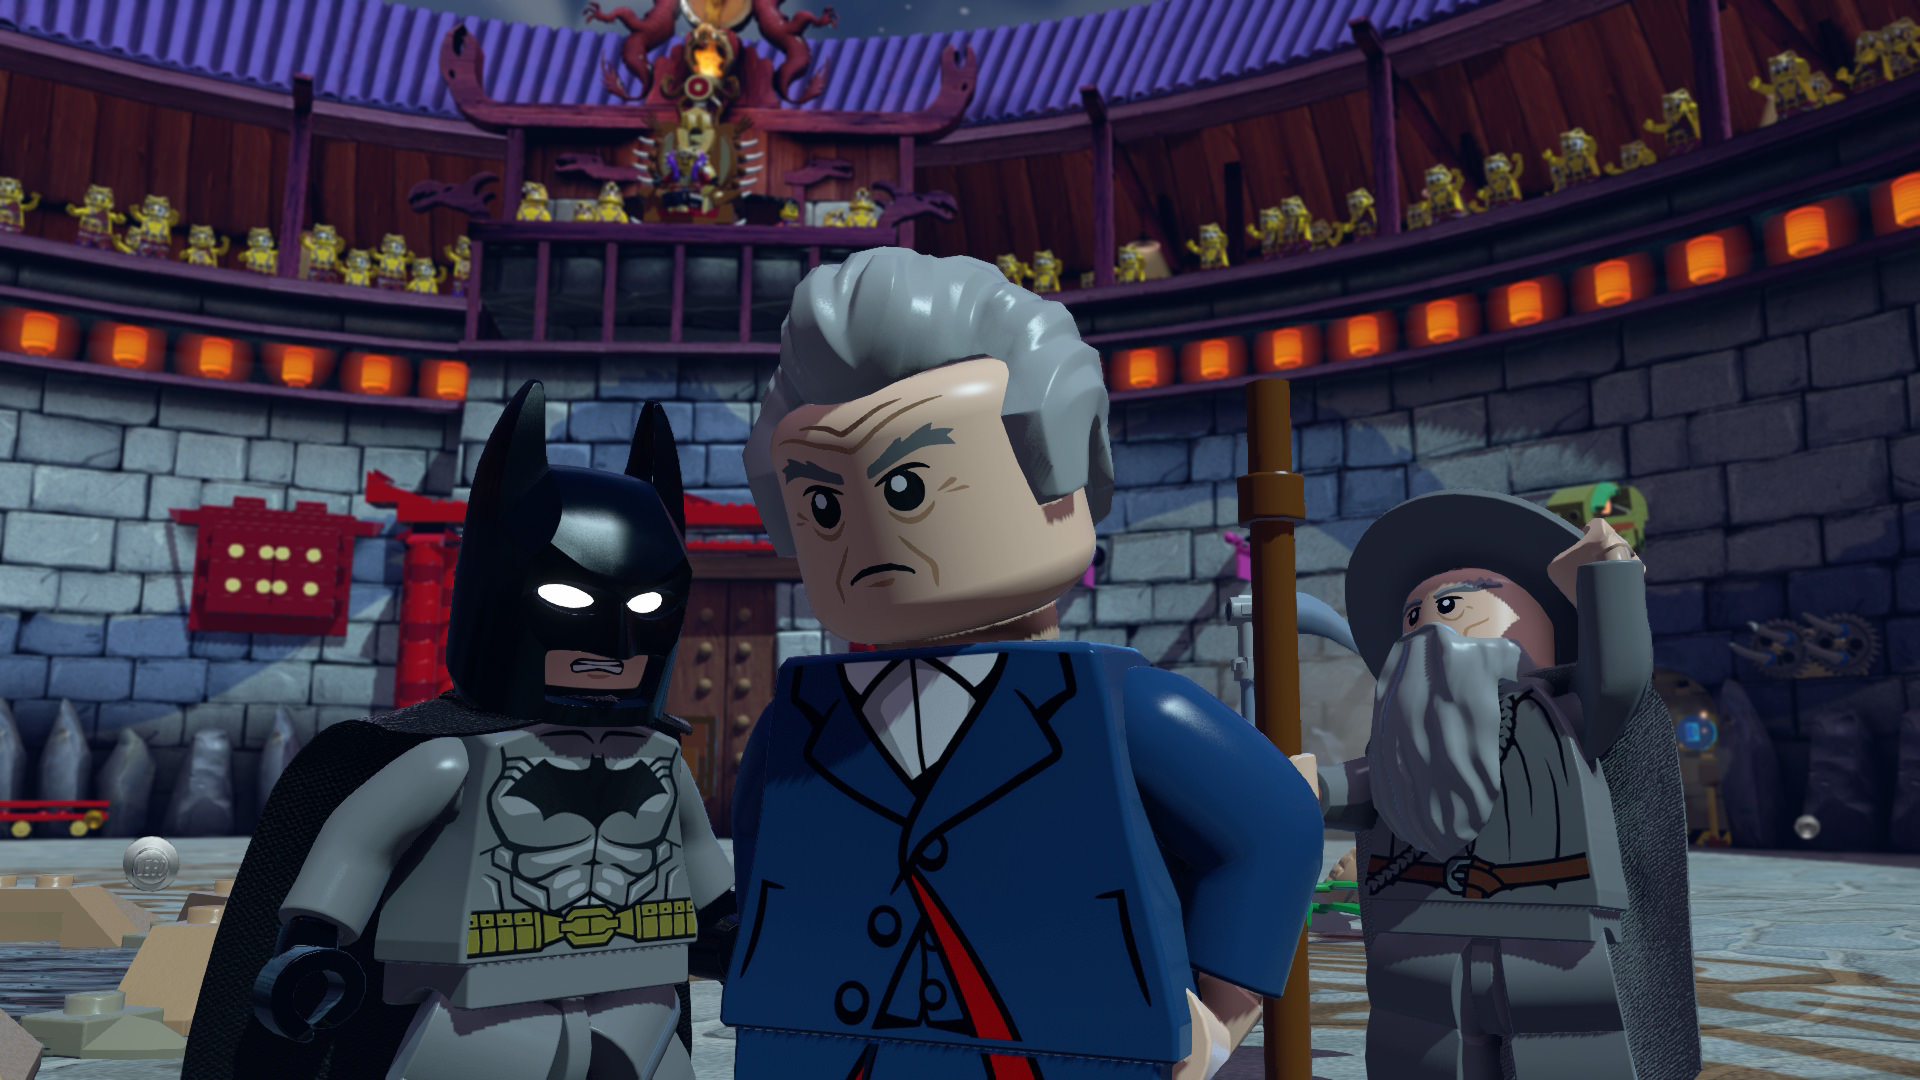 Can the LEGO Characters defeat Lord Vortech in LEGO Dimensions